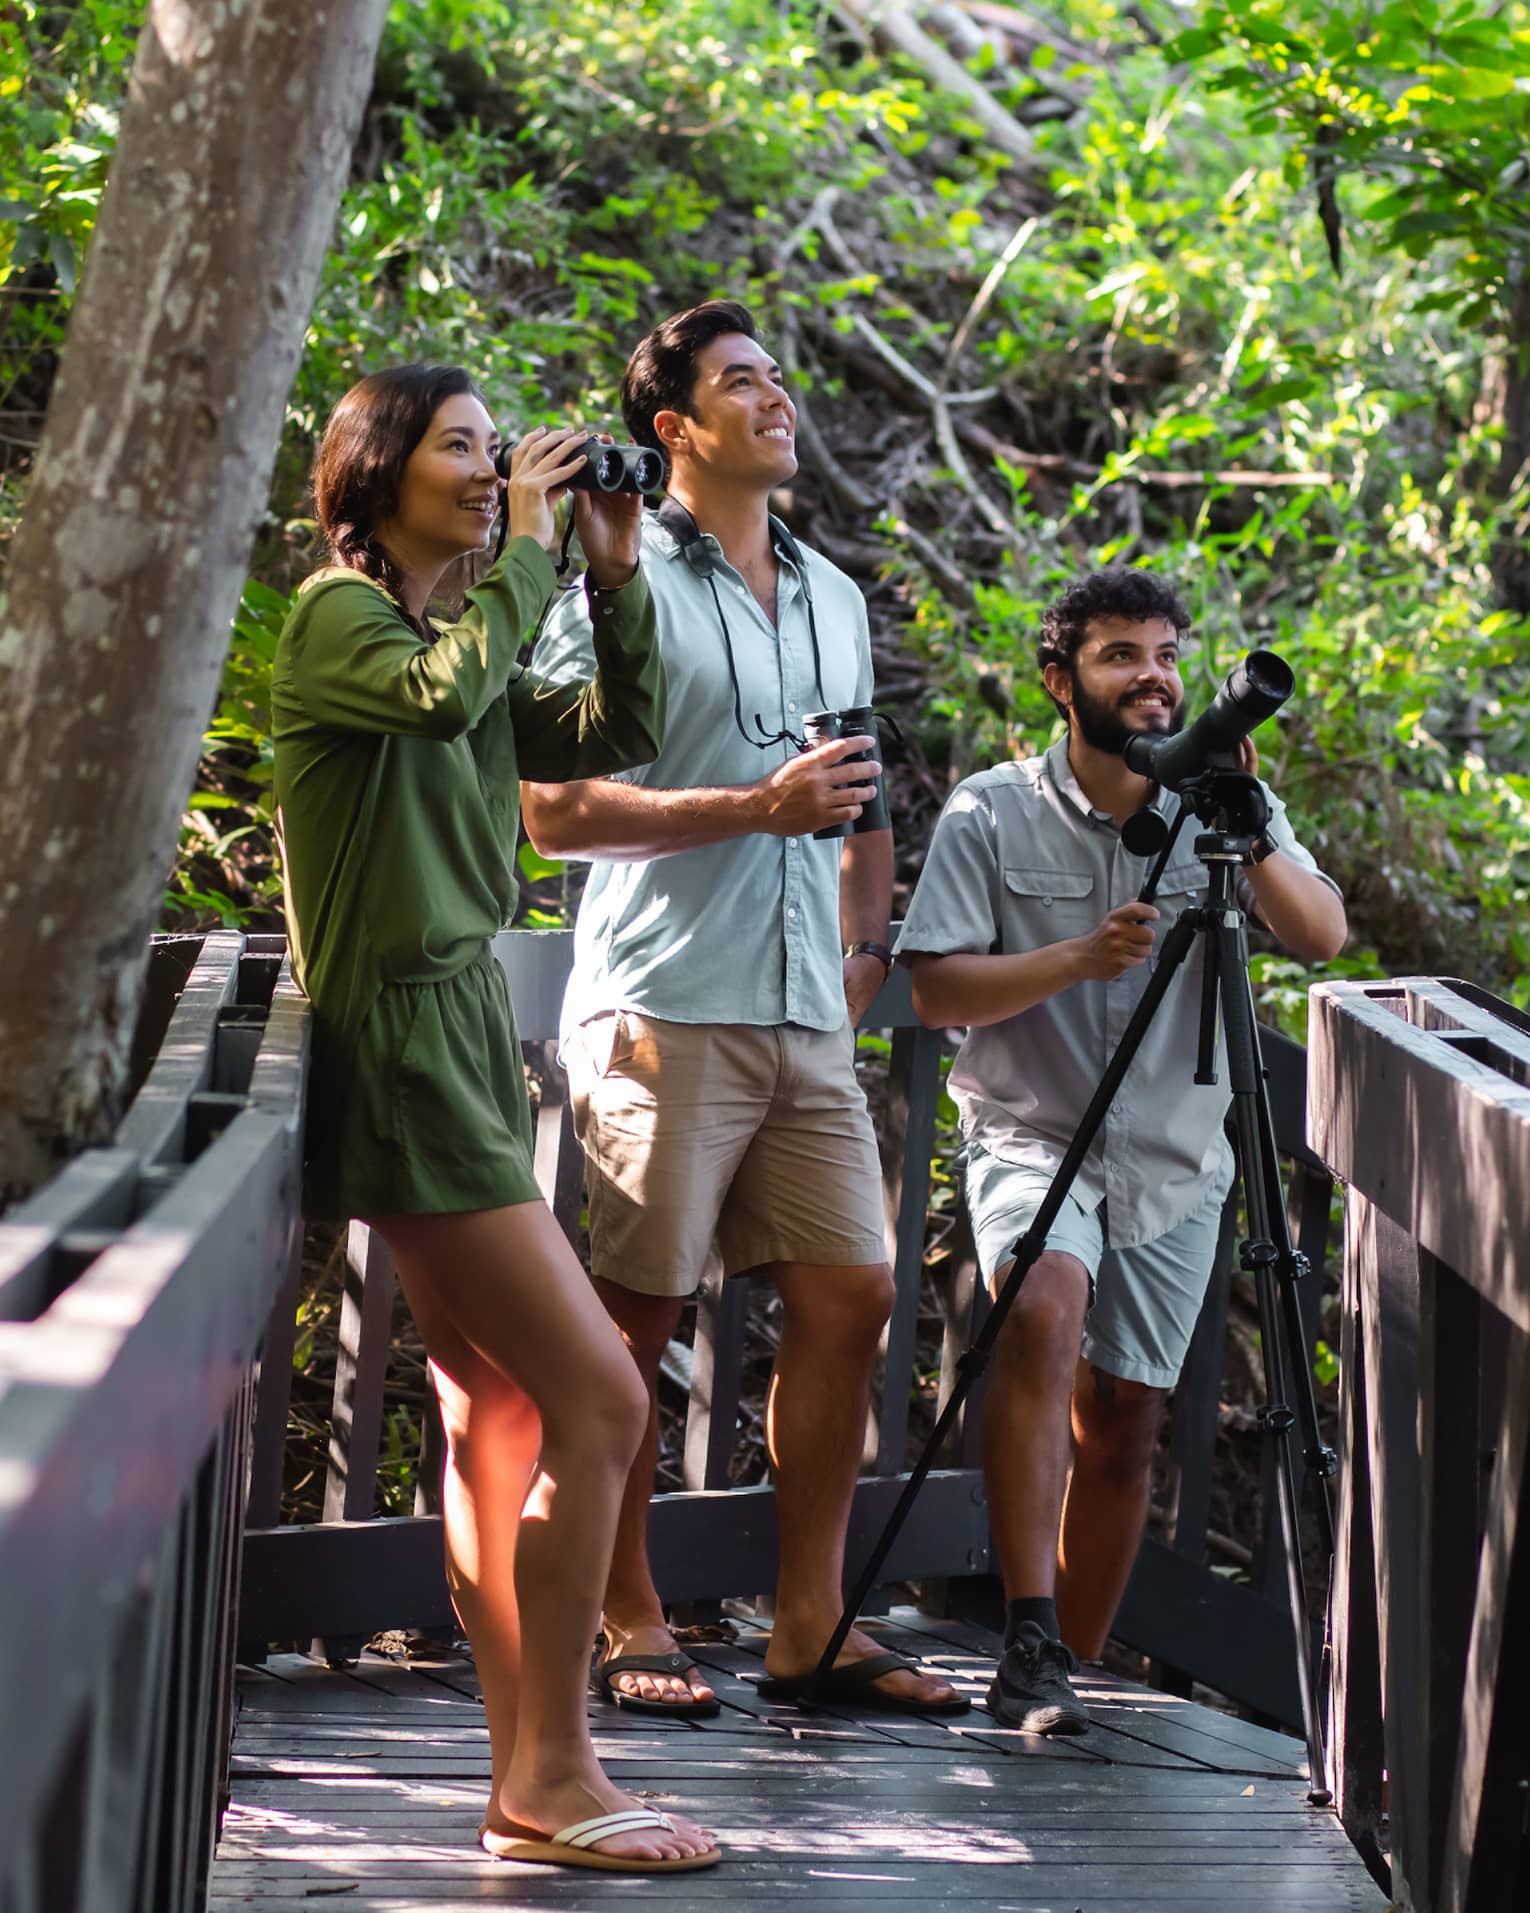 A woman holding binoculars, a man holding a recorder and a guide holding a camera on a tripod are gathered on a wooden forest walkway for bird watching